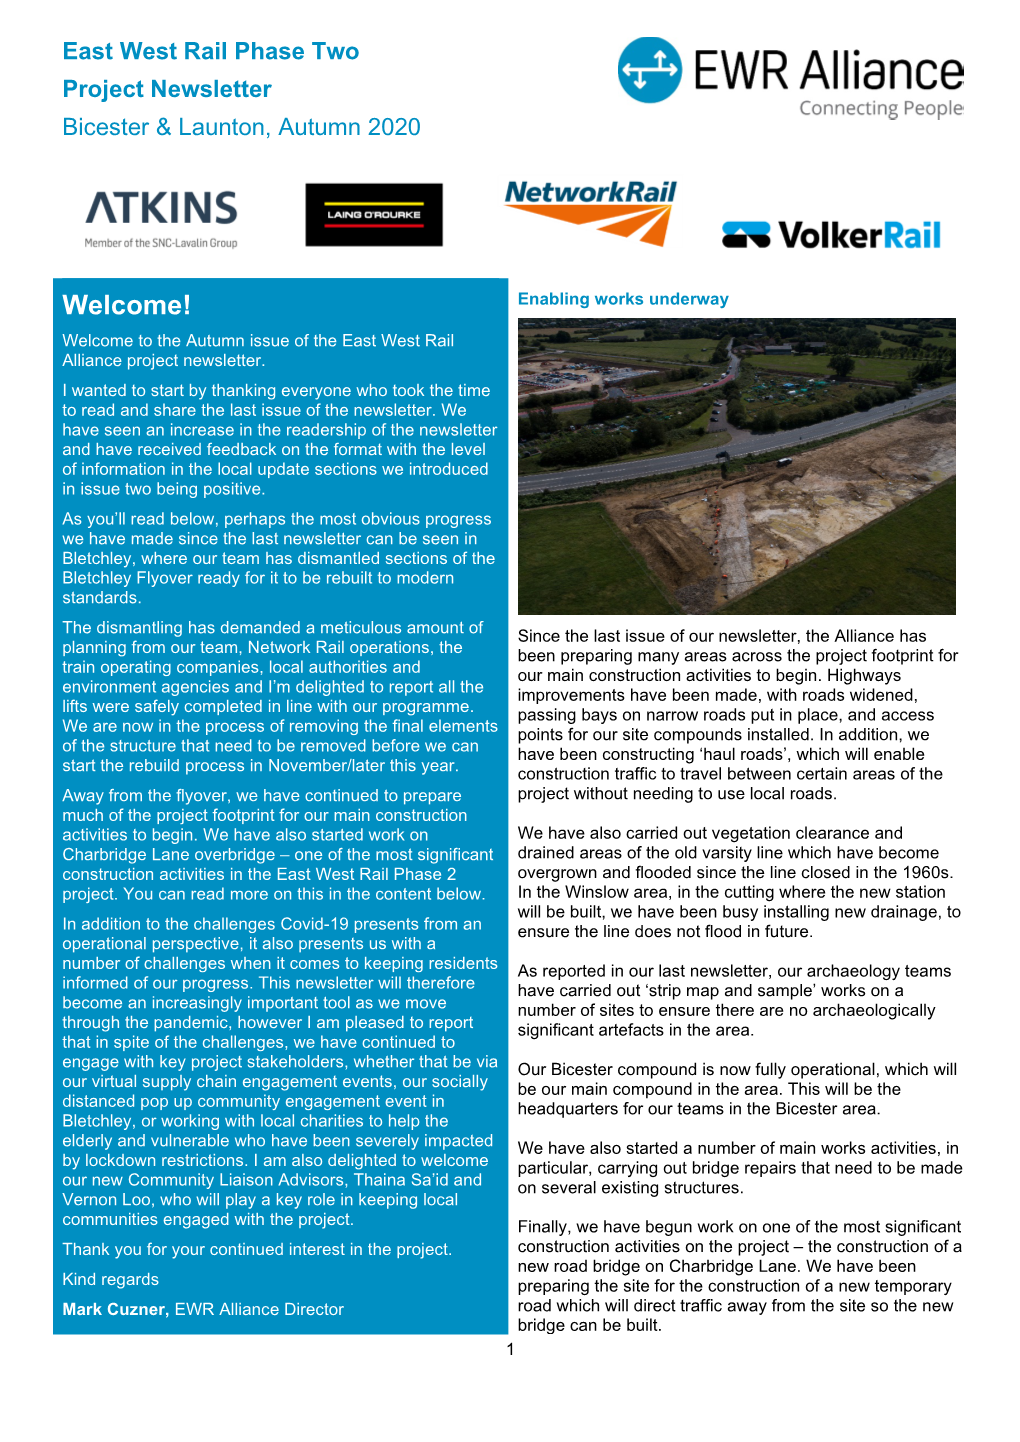 Bicester and Launton East West Rail Phase 2 Newsletter